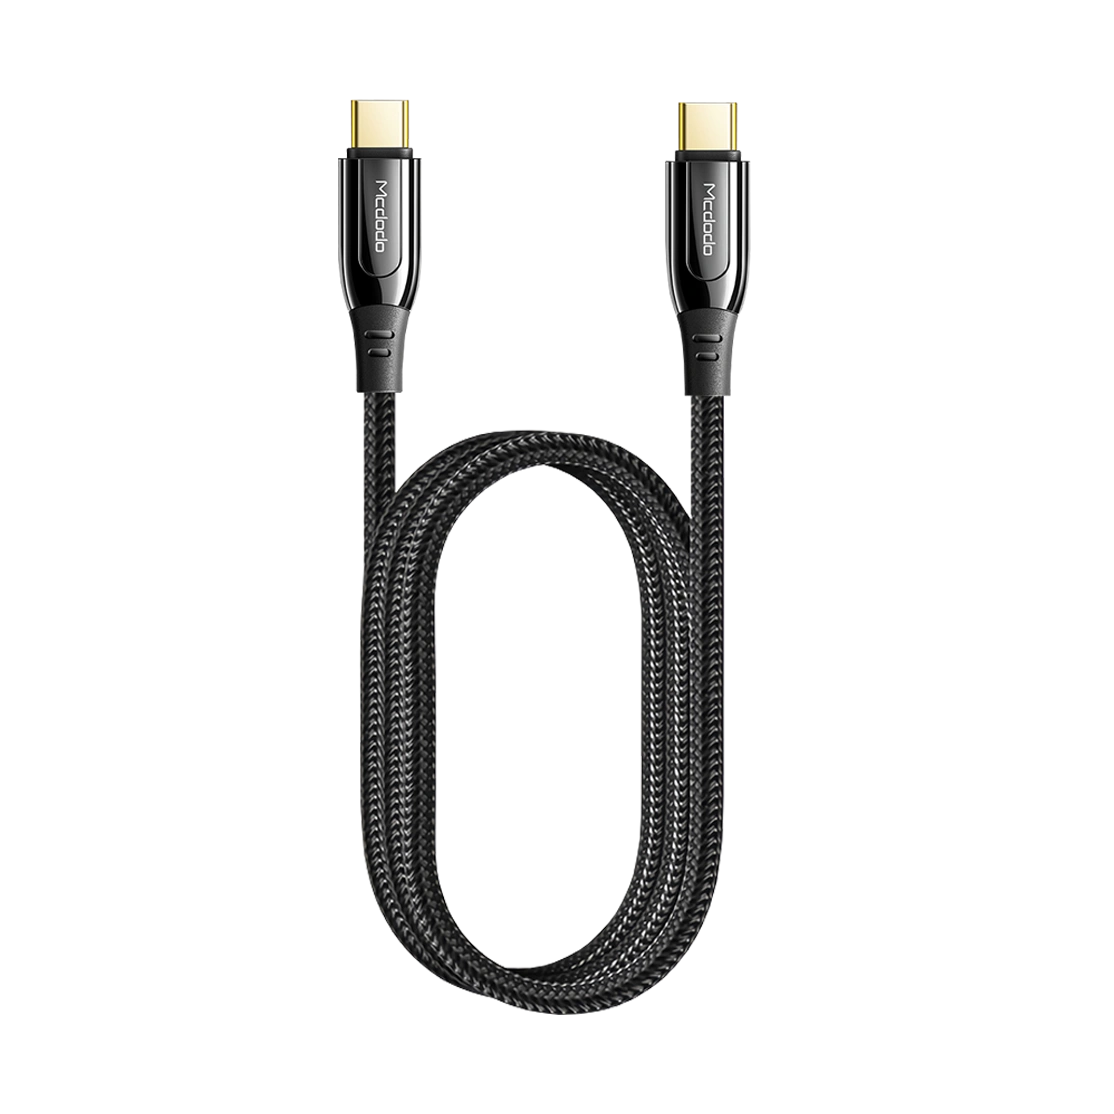 mcdodo-fast-charger-usb-c-cable-2m-ca-8123